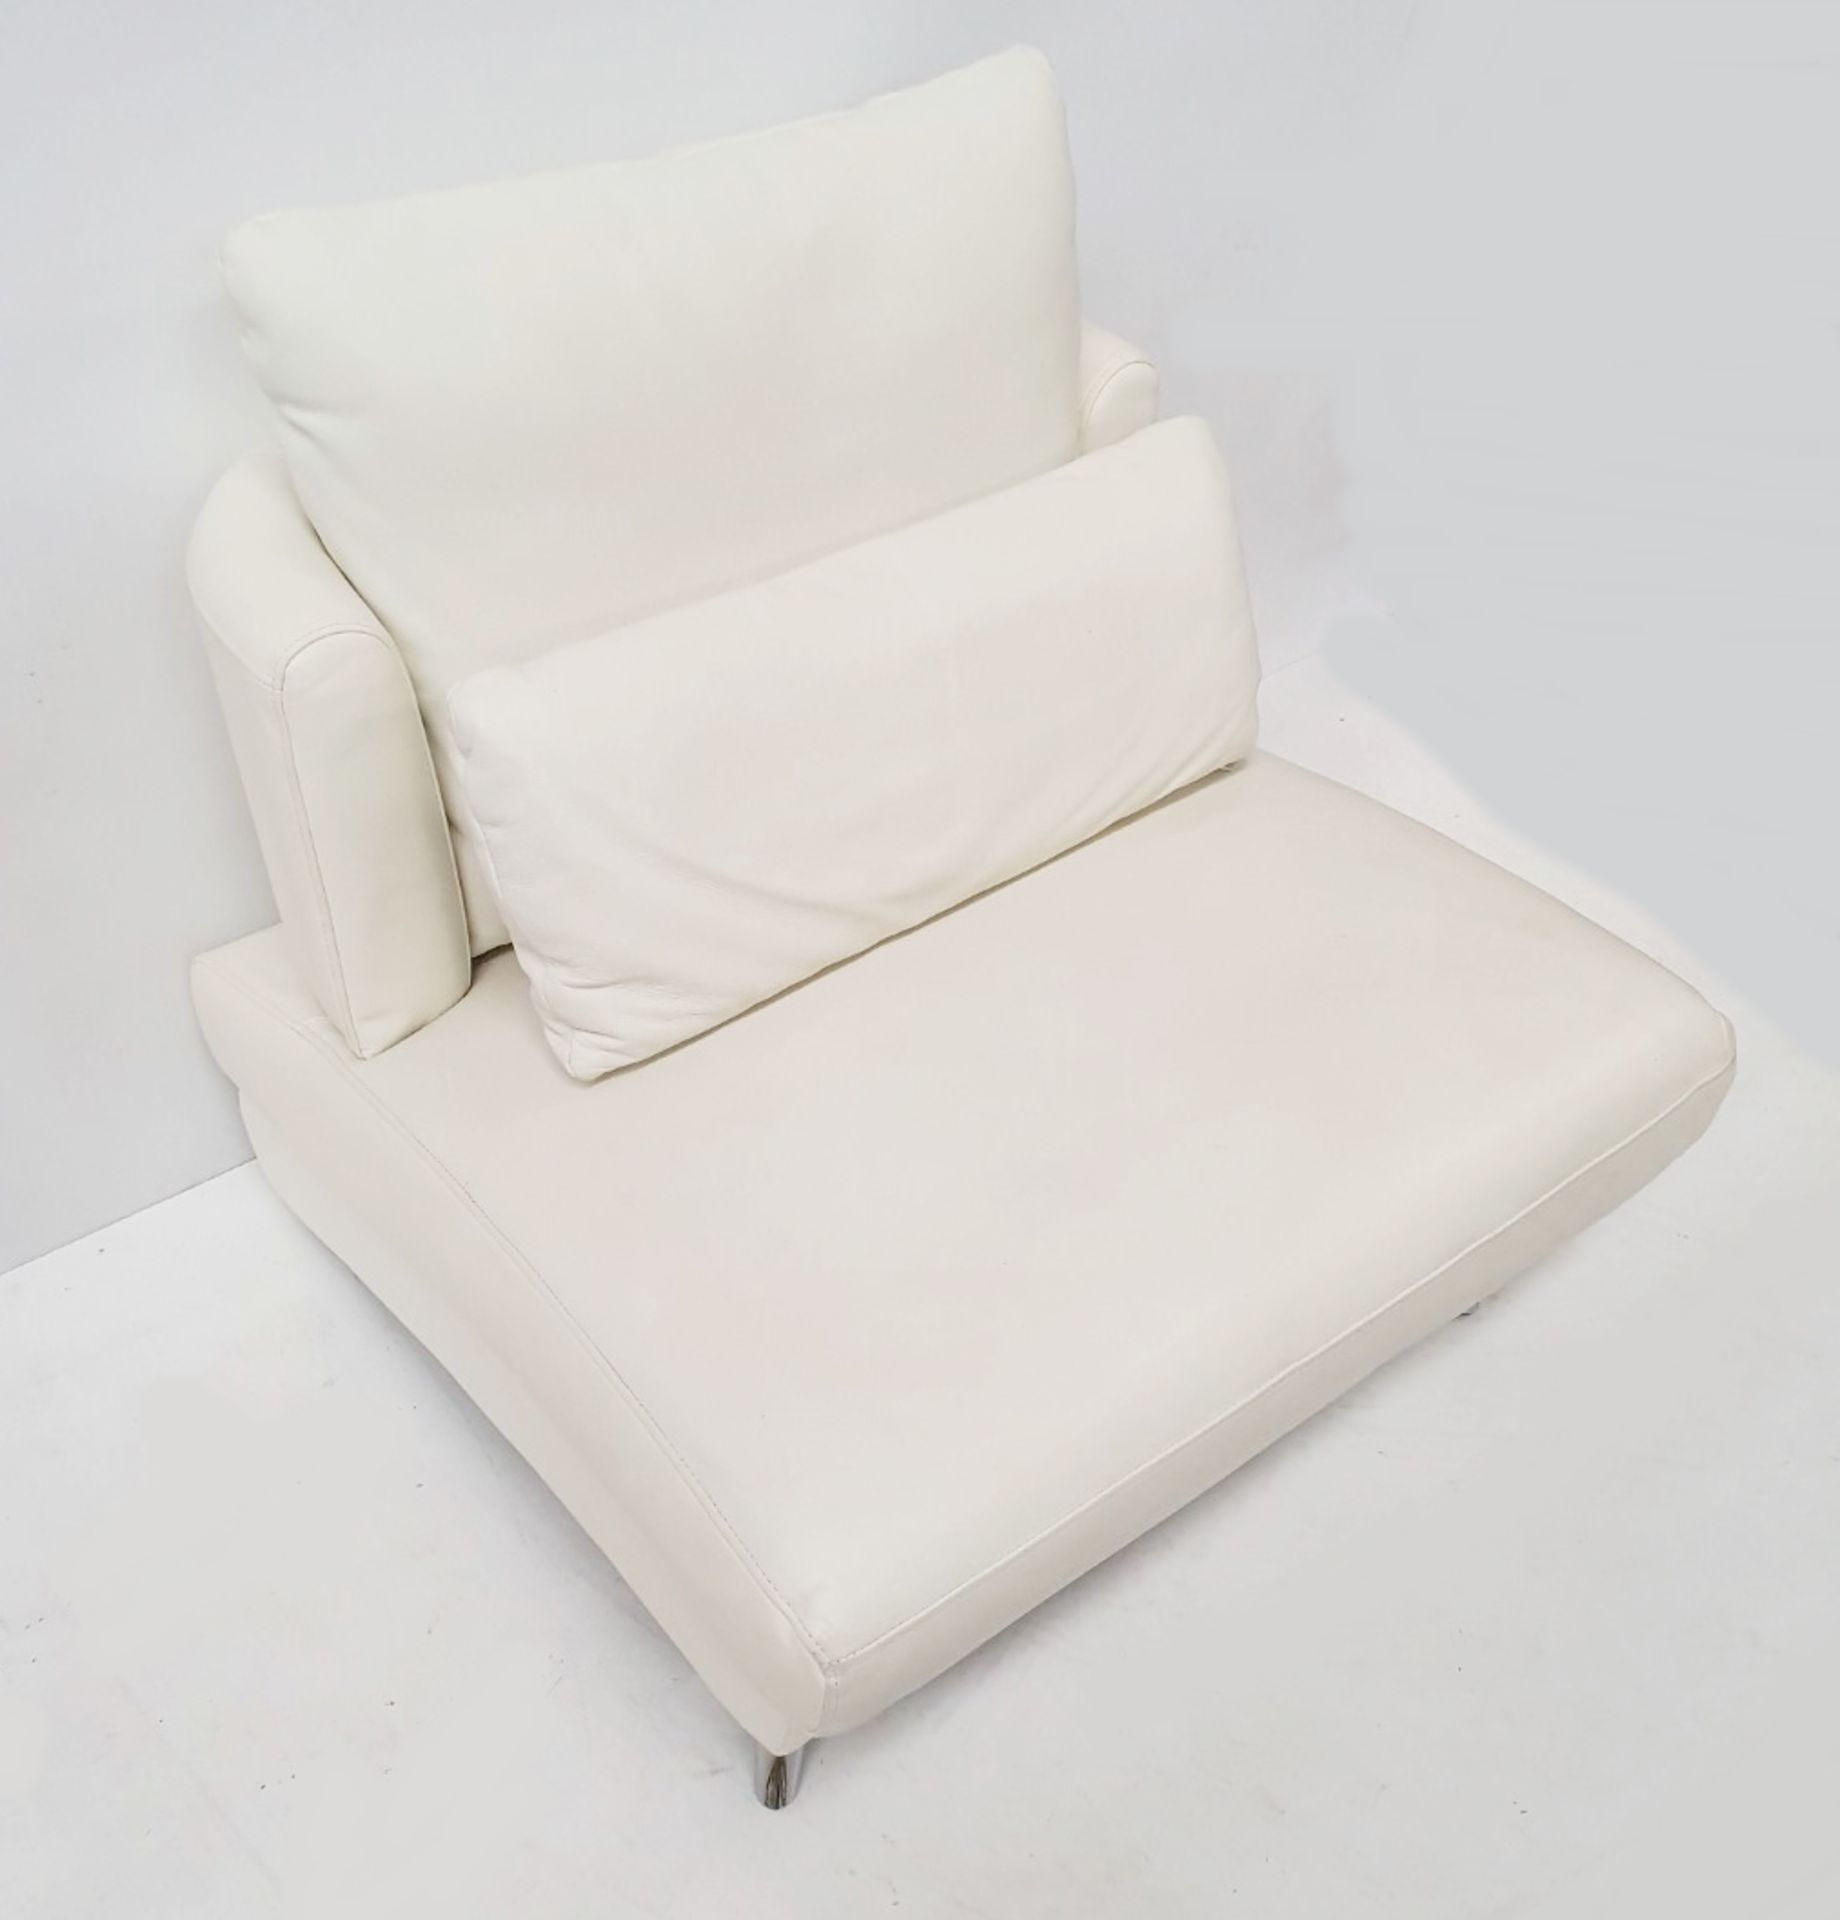 1 x Leather Lounge Chair in Cream - CL380 - Ref: H580 - Location Altrincham WA14 - NO VAT - Image 8 of 13